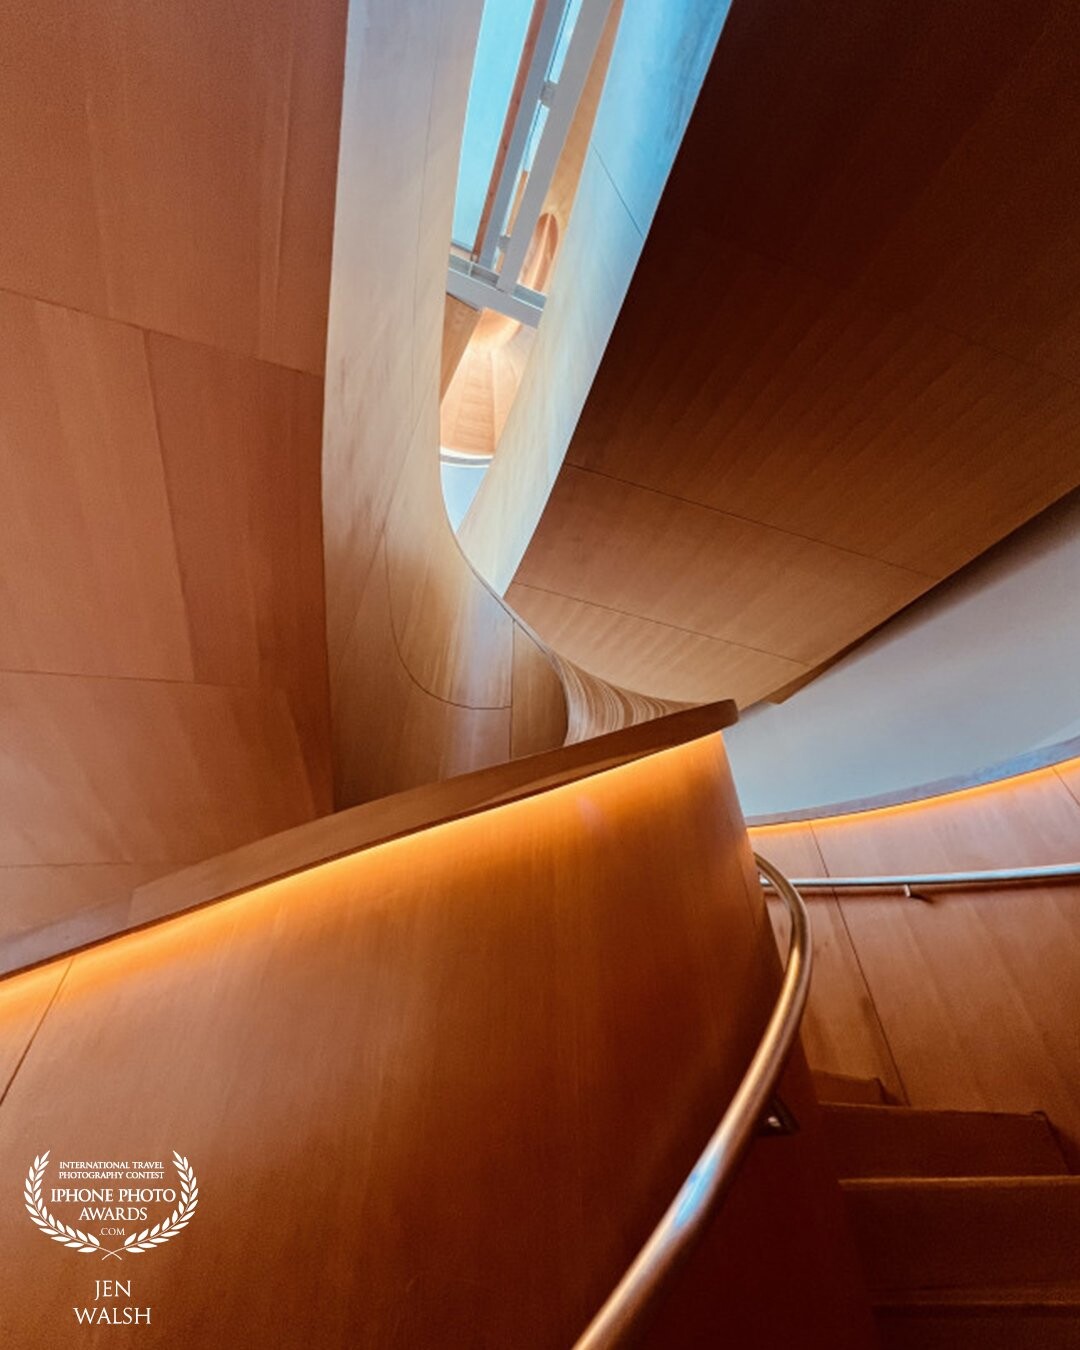 An abstract view of the iconic Frank Gehry - designed spiral staircase at the Art Gallery of Ontario. It is one of the most distinctive architectural features in all of Toronto.